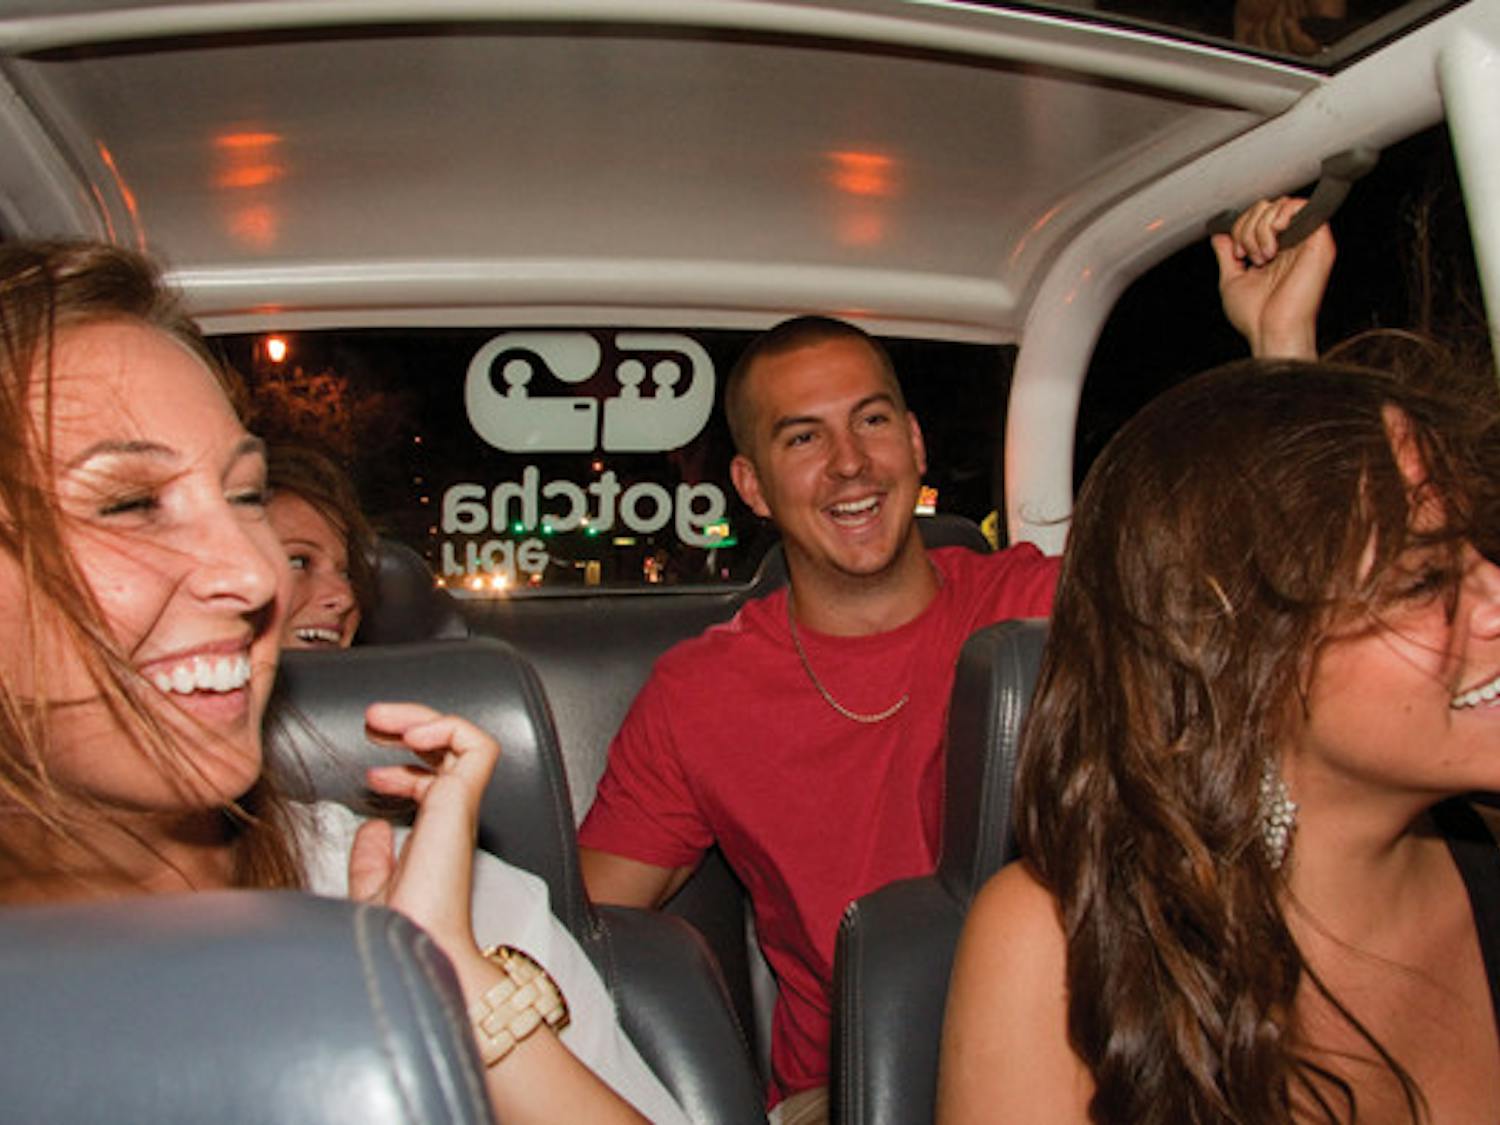 Left to right: Marisa Dunkel, Meagan Kaufman, John Slate and Alison Carestia cruise in a GOTCHA Ride down University Avenue on the way to midtown Wednesday night.